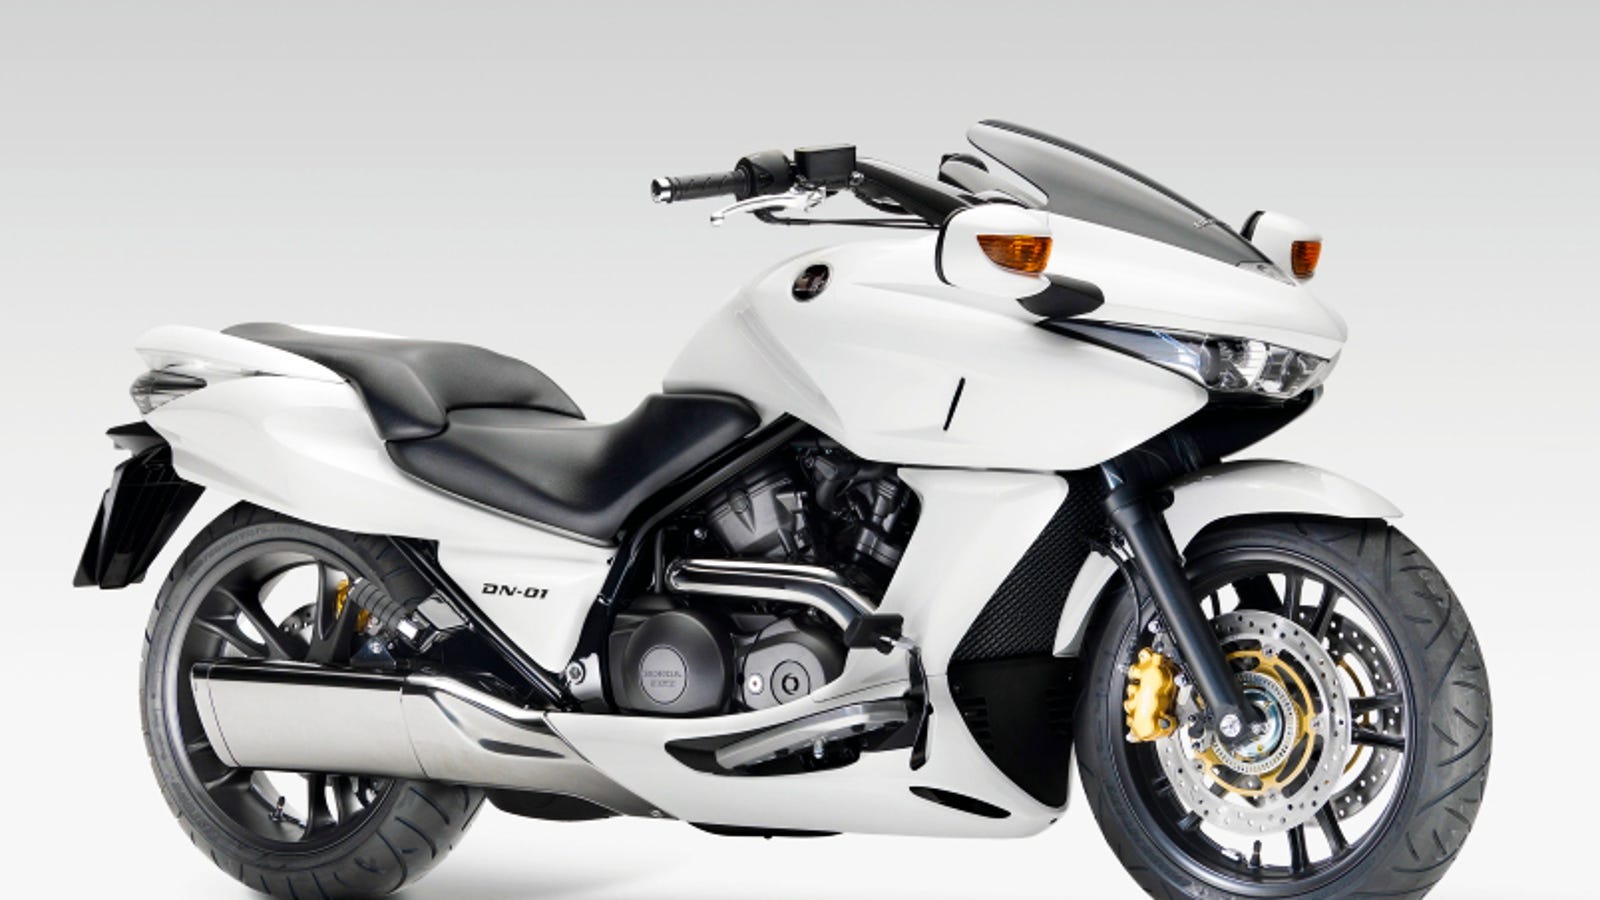 Honda Plans To Build All-Electric Motorcycle By 2010